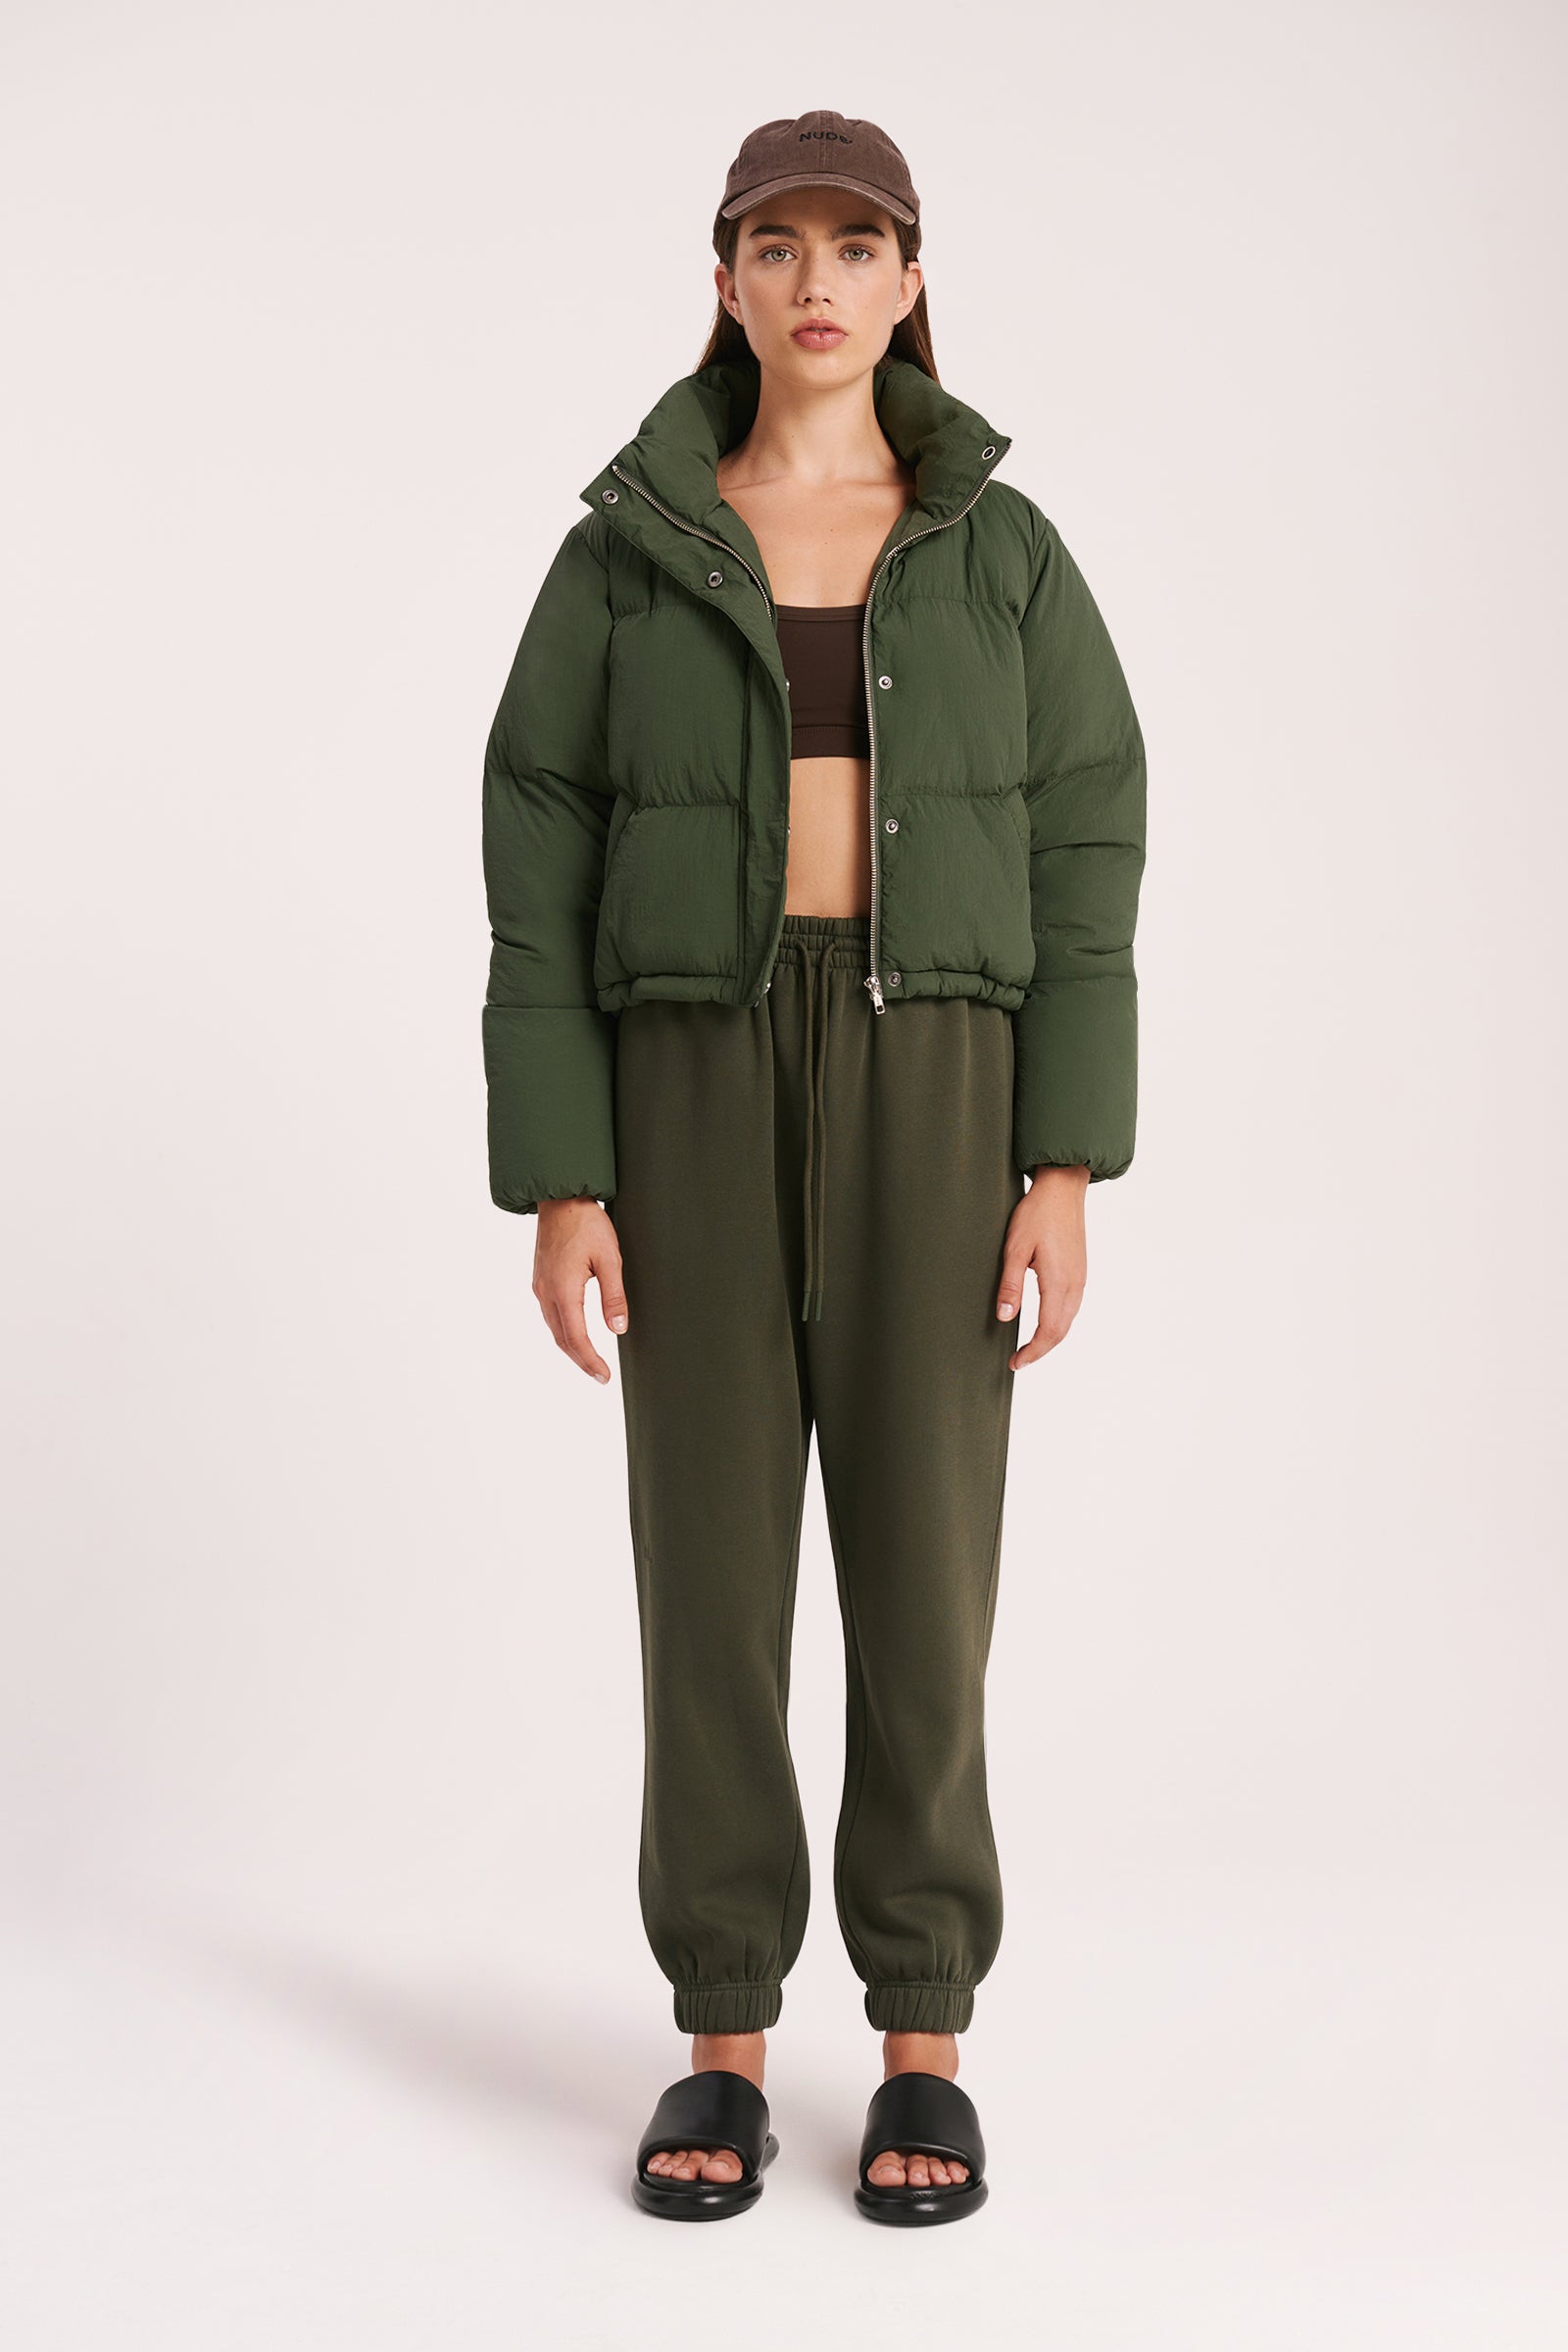 Nude Lucy Topher Puffer Jacket In a Deep Green Hunter Colour